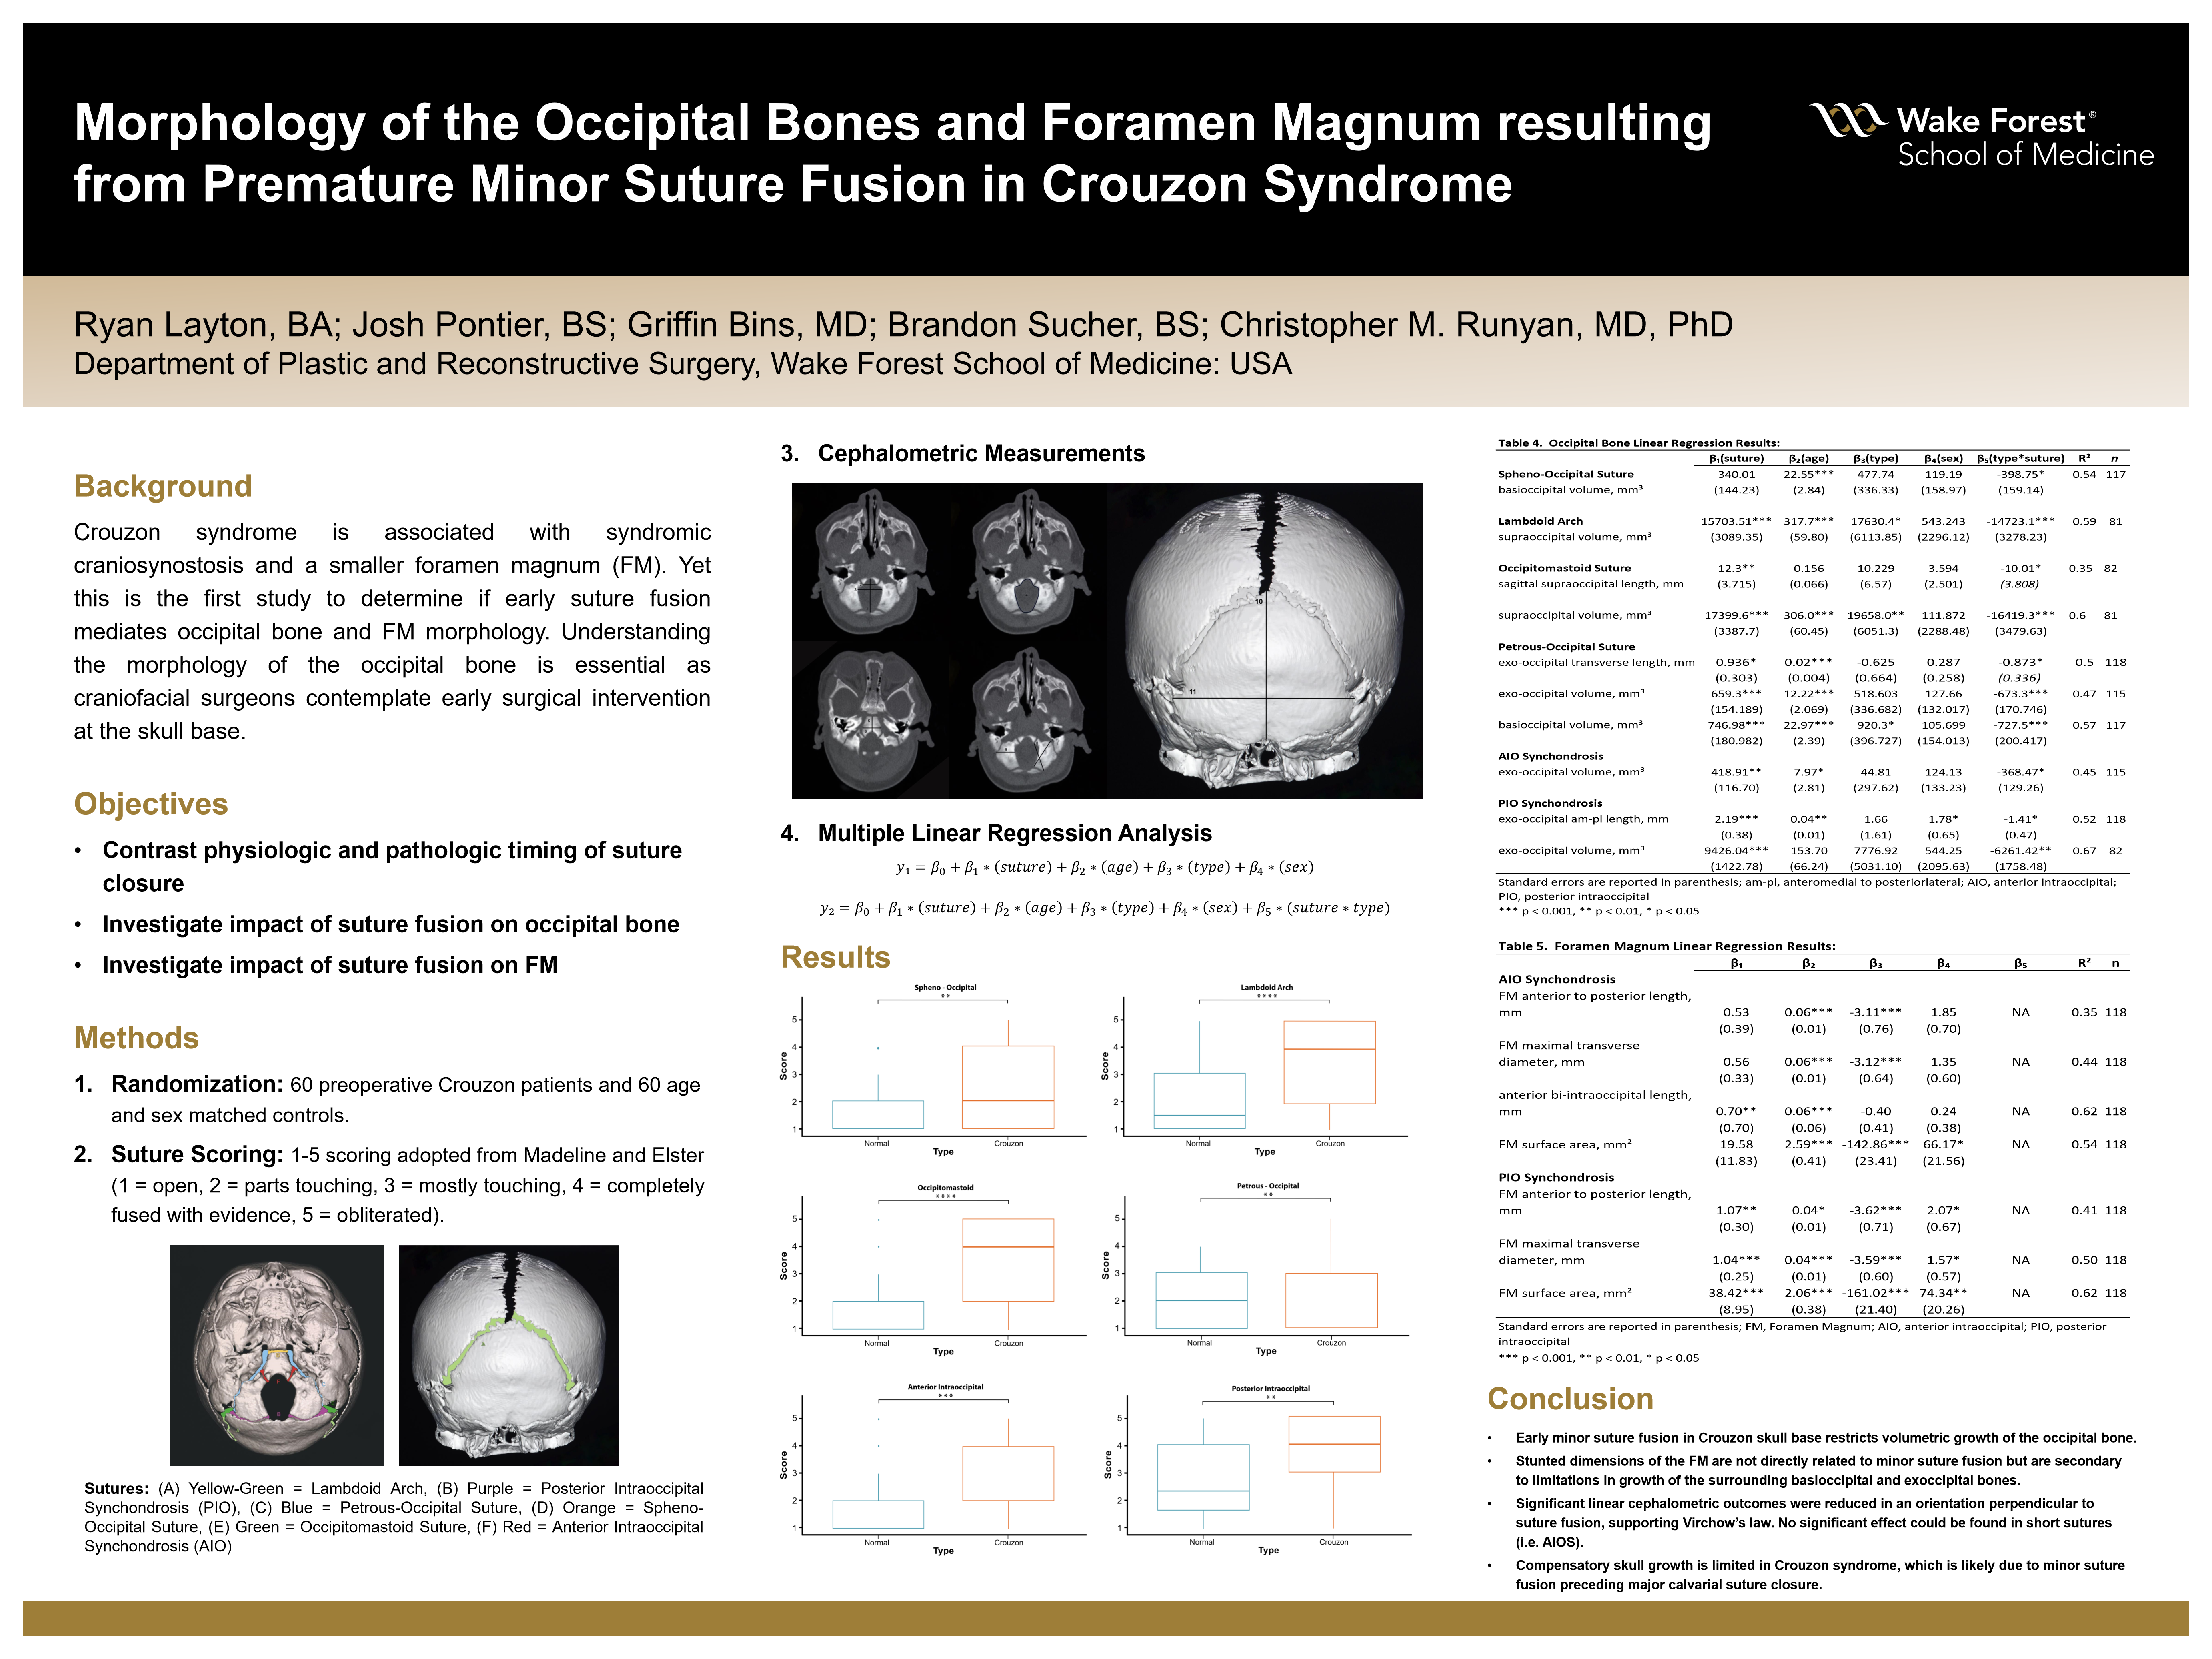 Showcase Image for Morphology of the Occipital Bones and Foramen Magnum resulting from Premature Minor Suture Fusion in Crouzon Syndrome